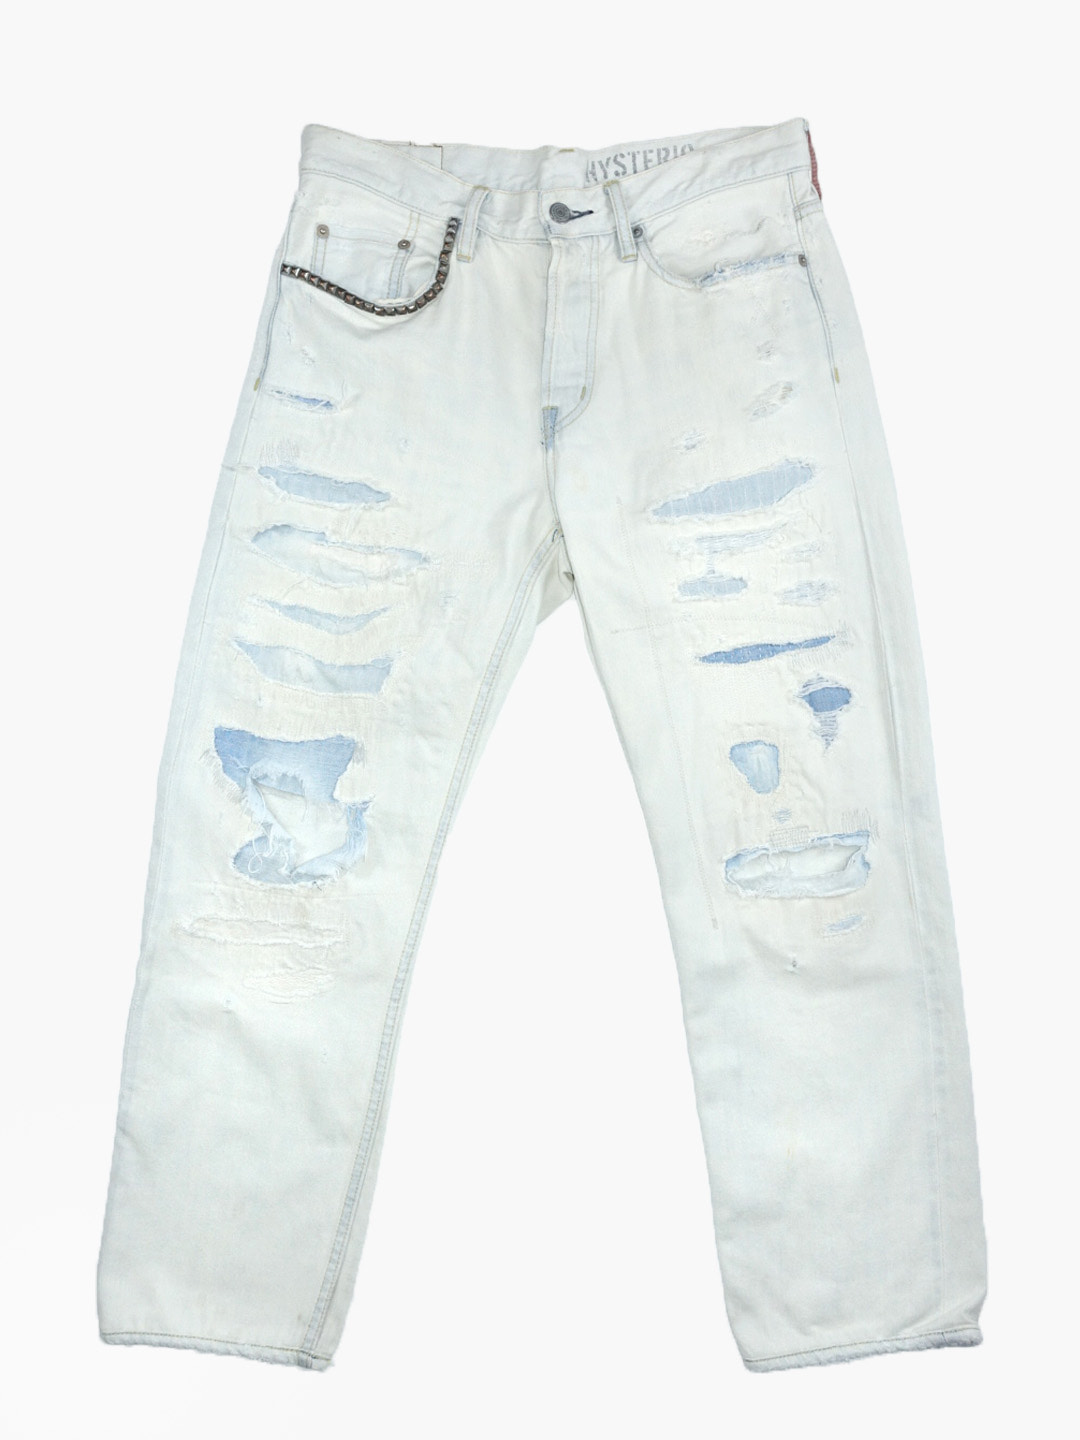 HYSTERIC GLAMOURDamaged jeans